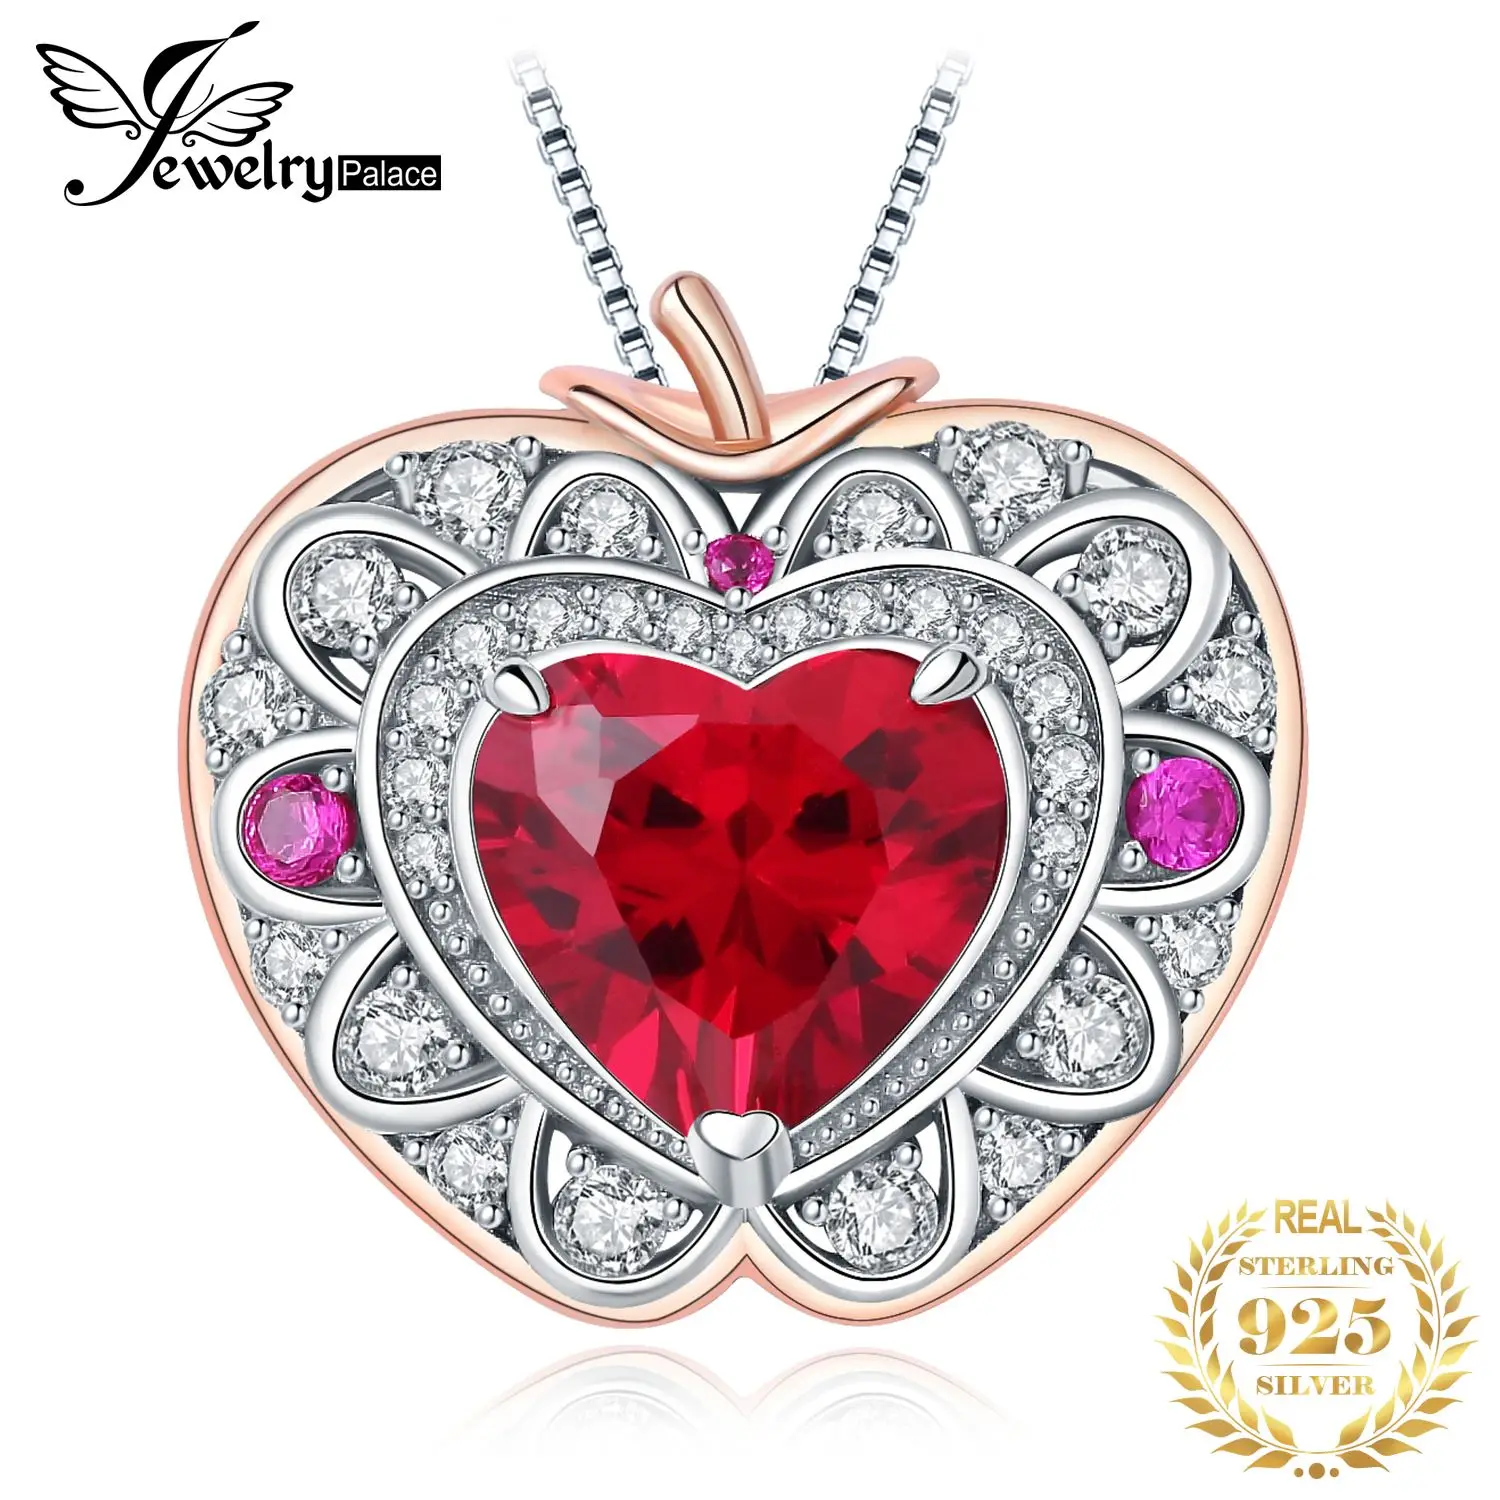 

JewelryPalace New Arrival Apple Heart 3.7ct Created Ruby 925 Sterling Silver Pendant Necklace for Woman Fashion Jewelry No Chain